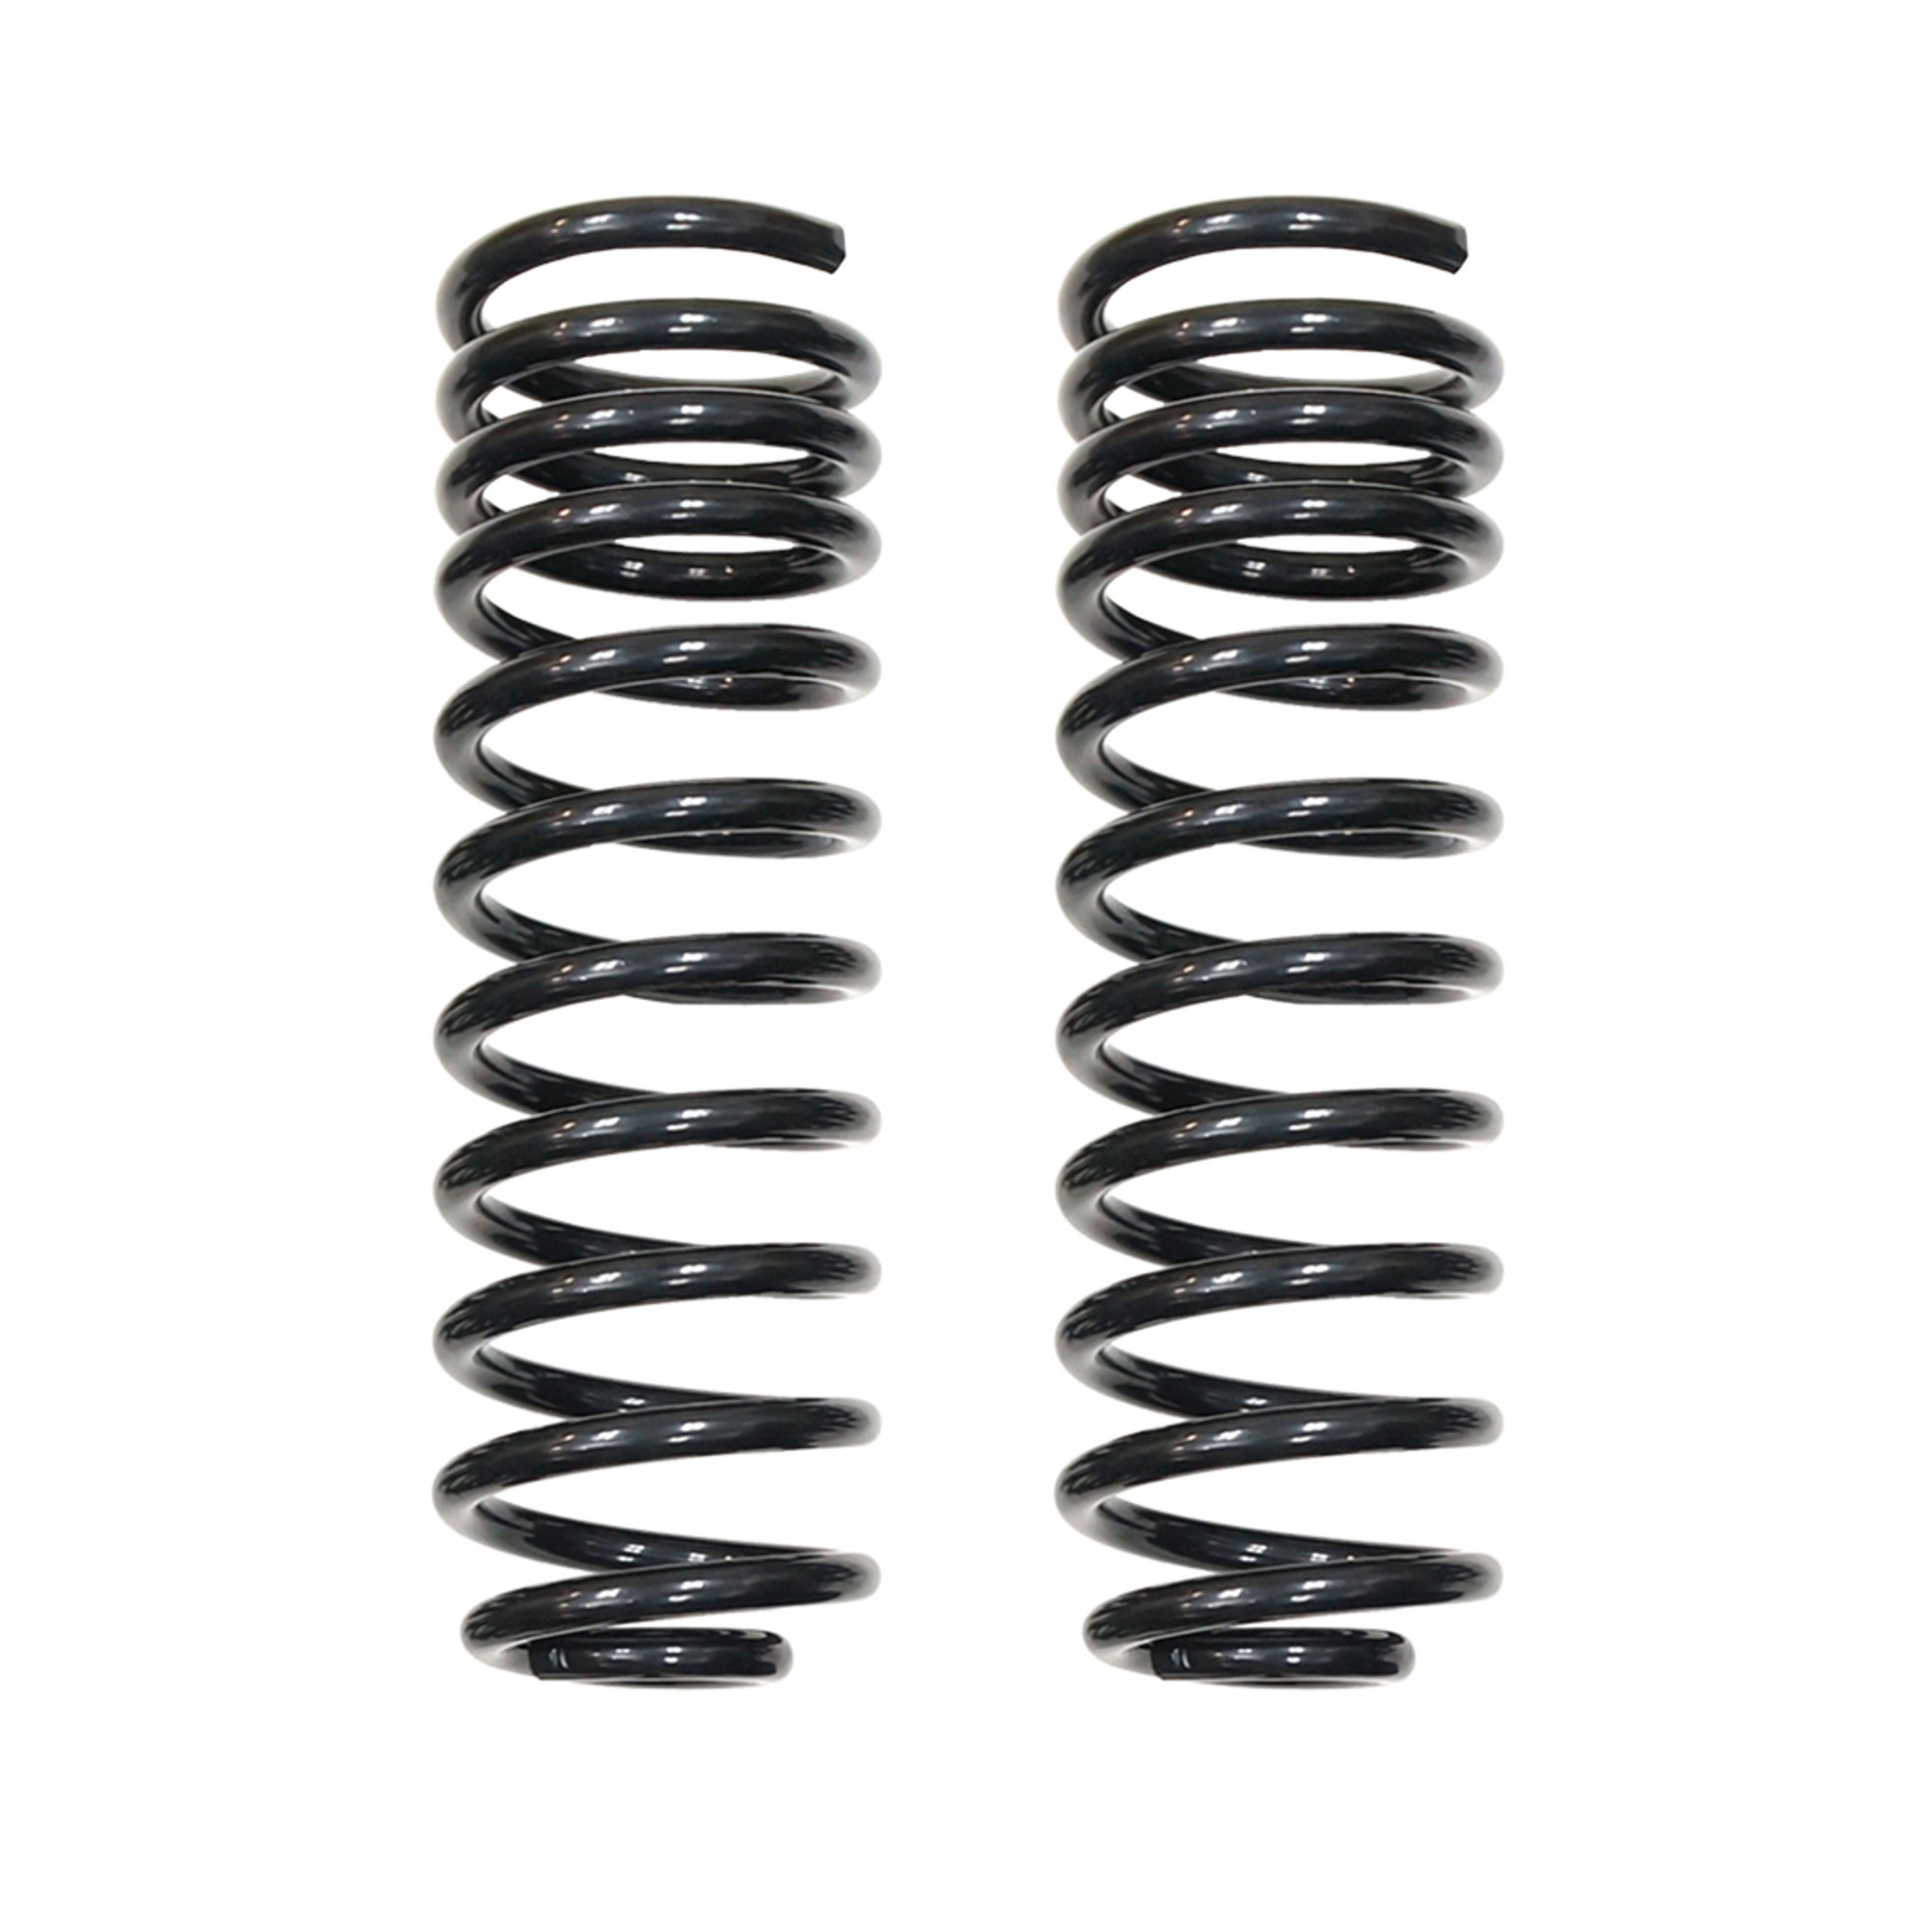 Show details for Rancho Suspension Rancho Coil Spring Set.